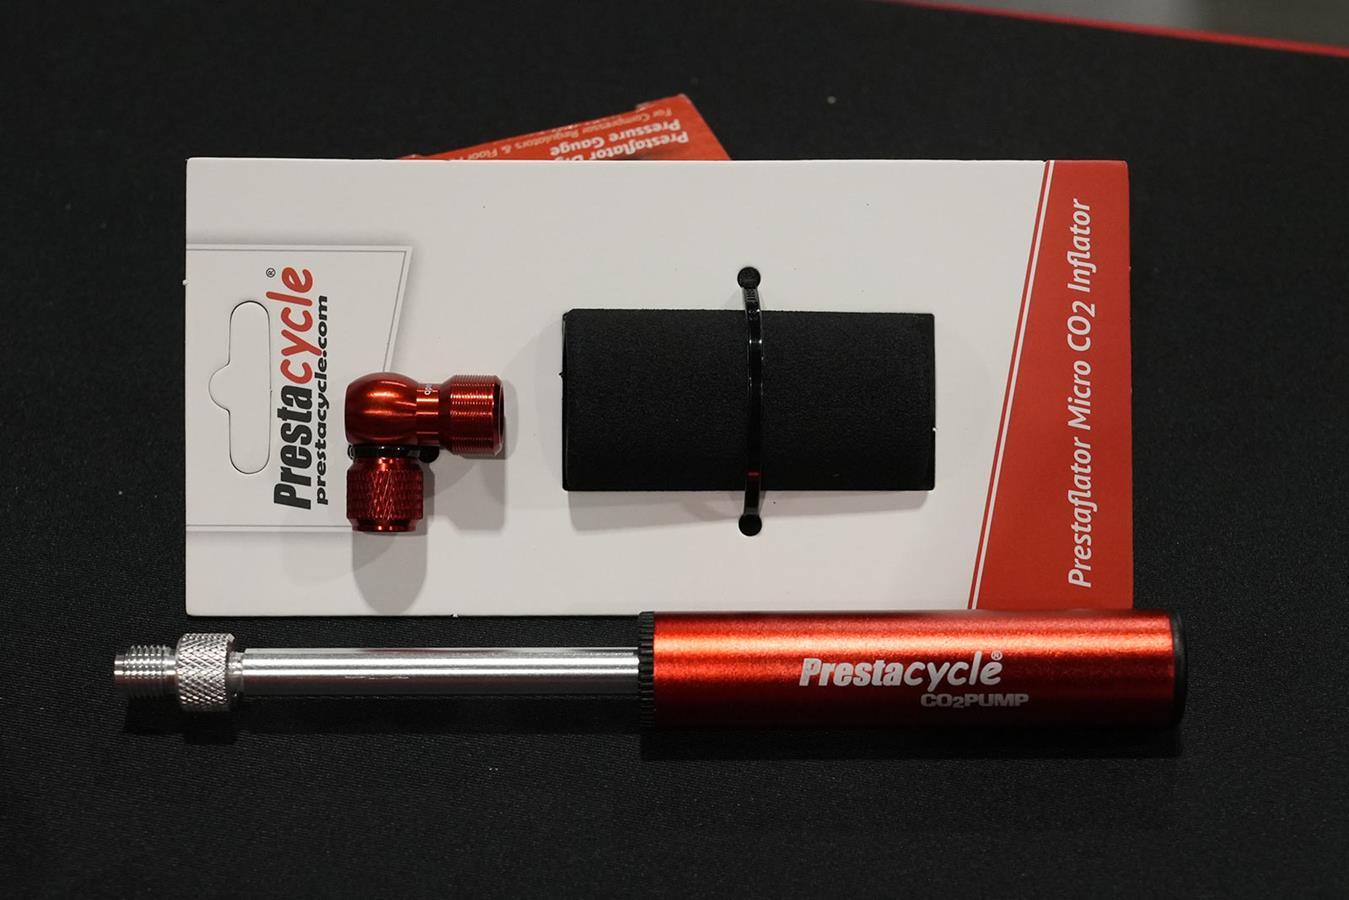 The smallest and lightest bicycle pump.  Prestacycle has revealed a lot of news